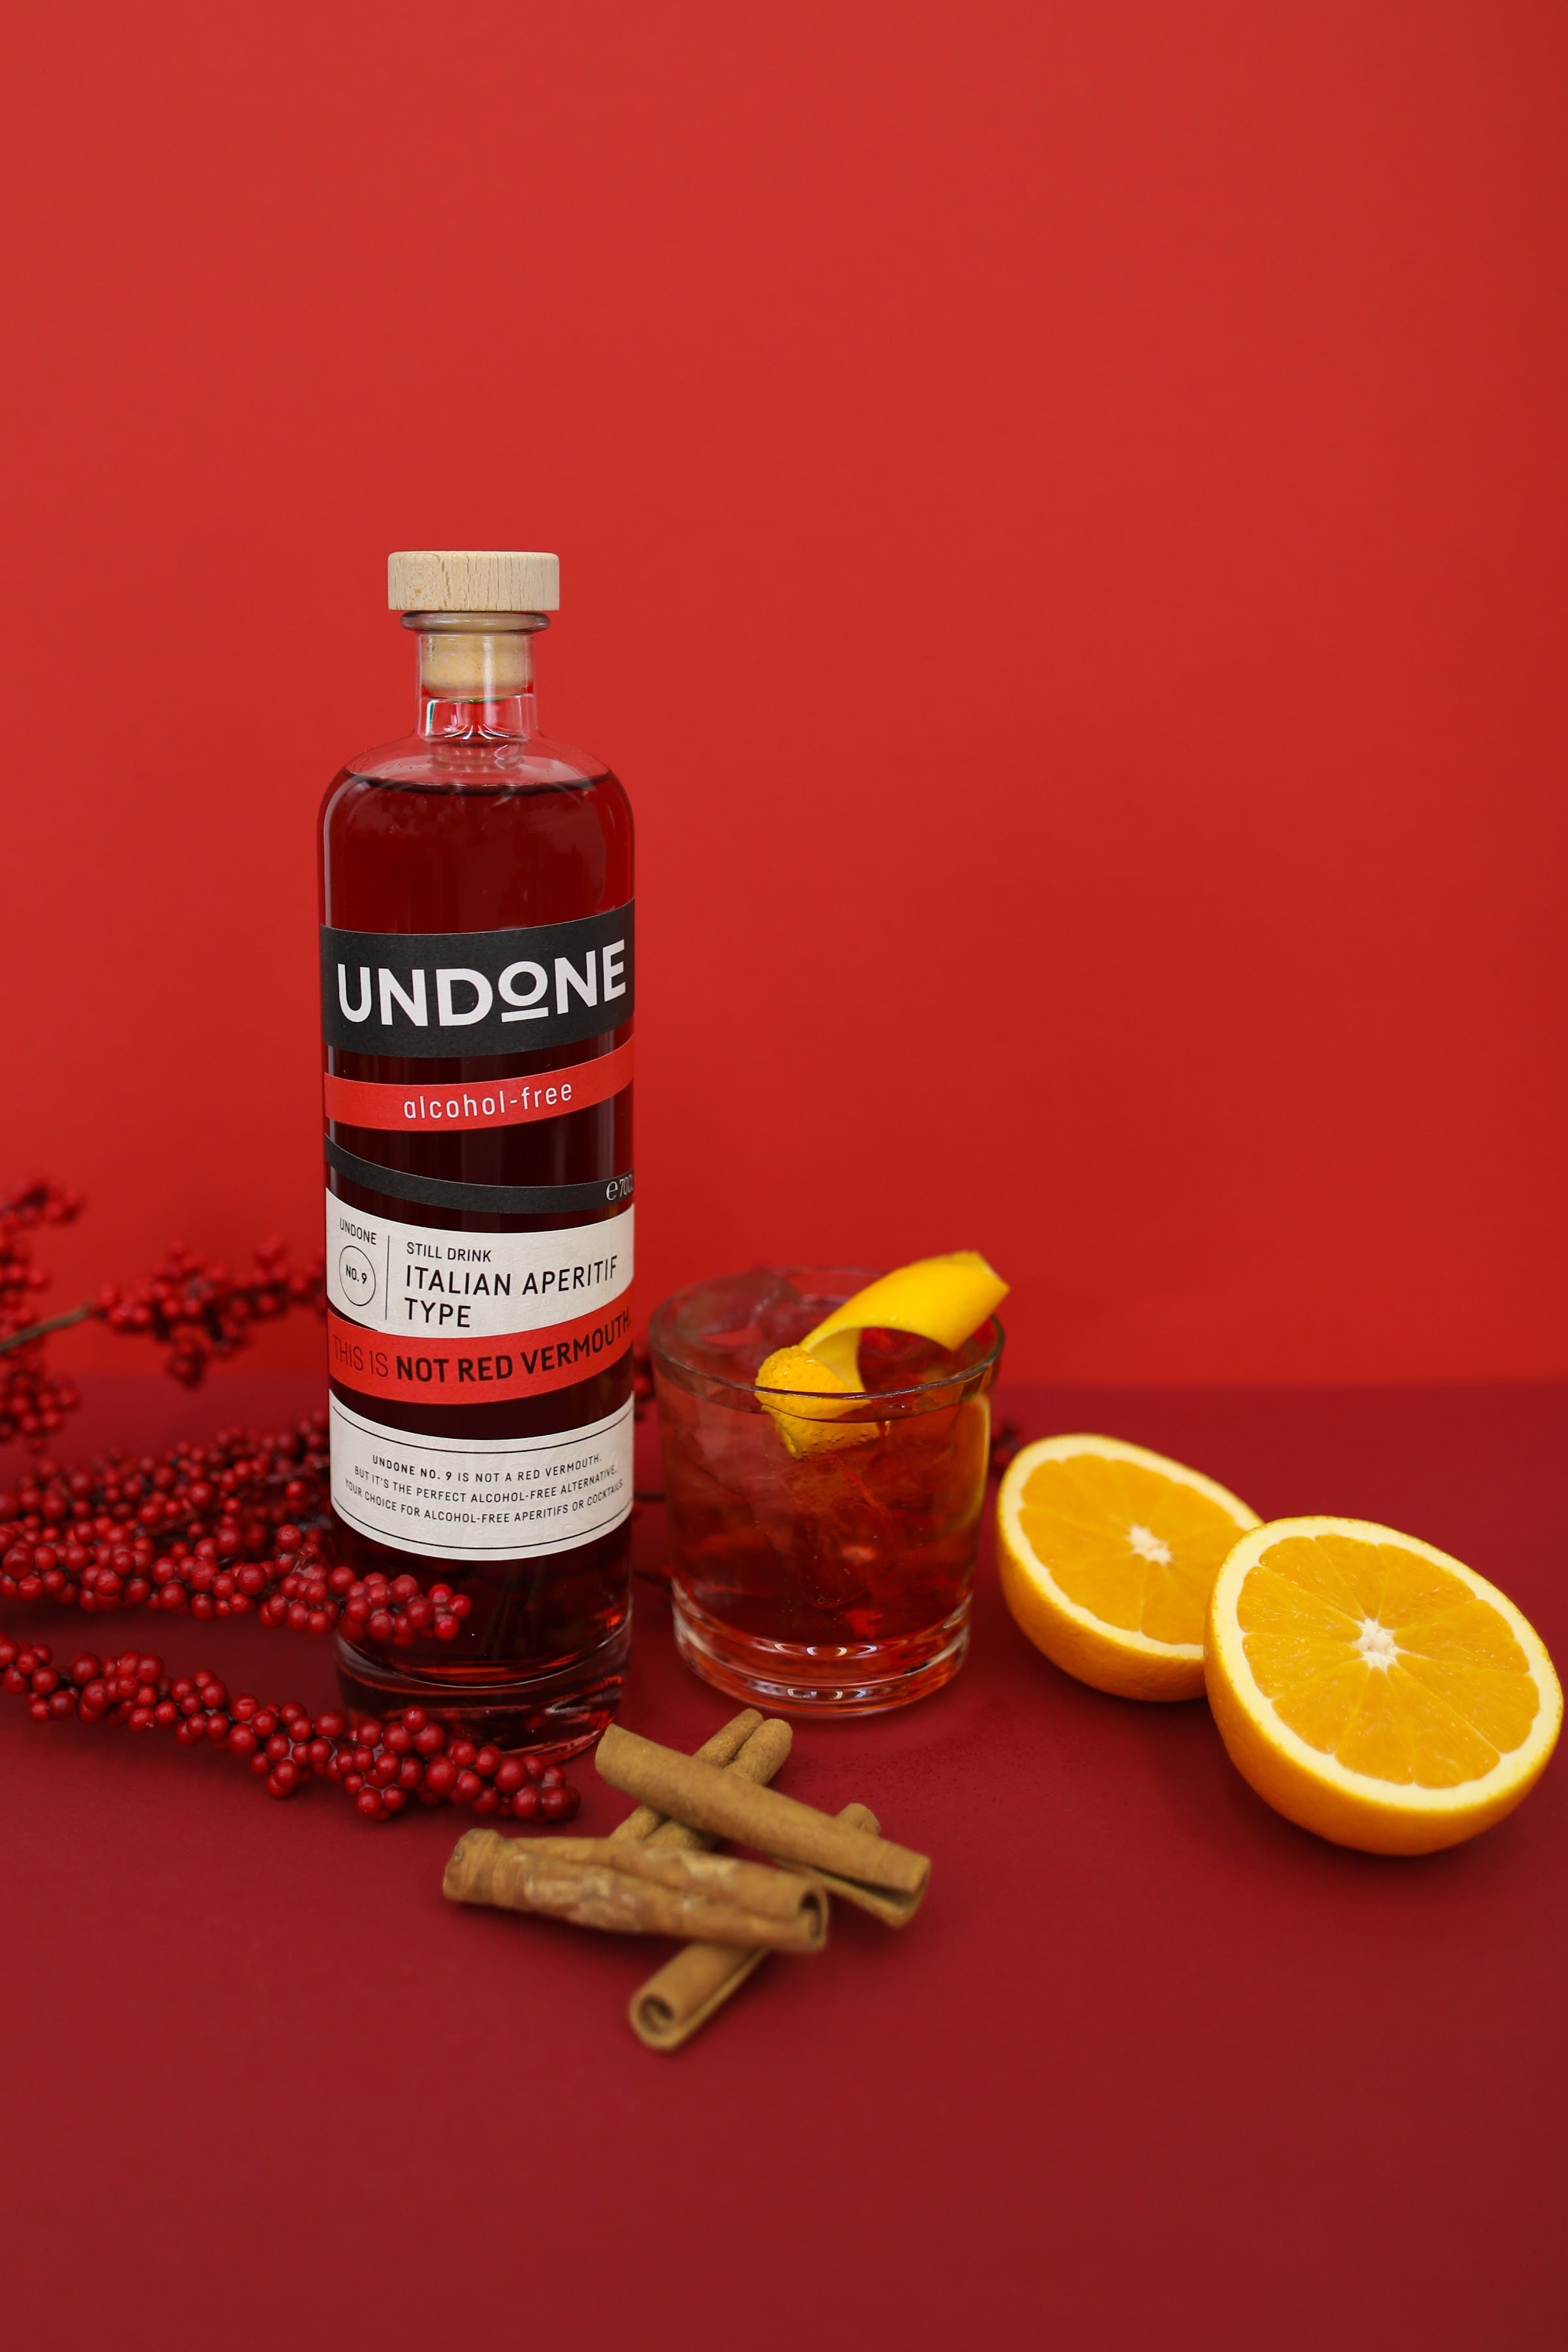 NOT Type RED | THIS Italian UNDONE Alternative Beverage Free Aperitif mL)| Aperitif Spirits | Liqueur VERMOUTH Red IS Non No.9 Vermouth - Cocktails (750 Proof Zero Alcoholic Alcohol For Non-alcoholic